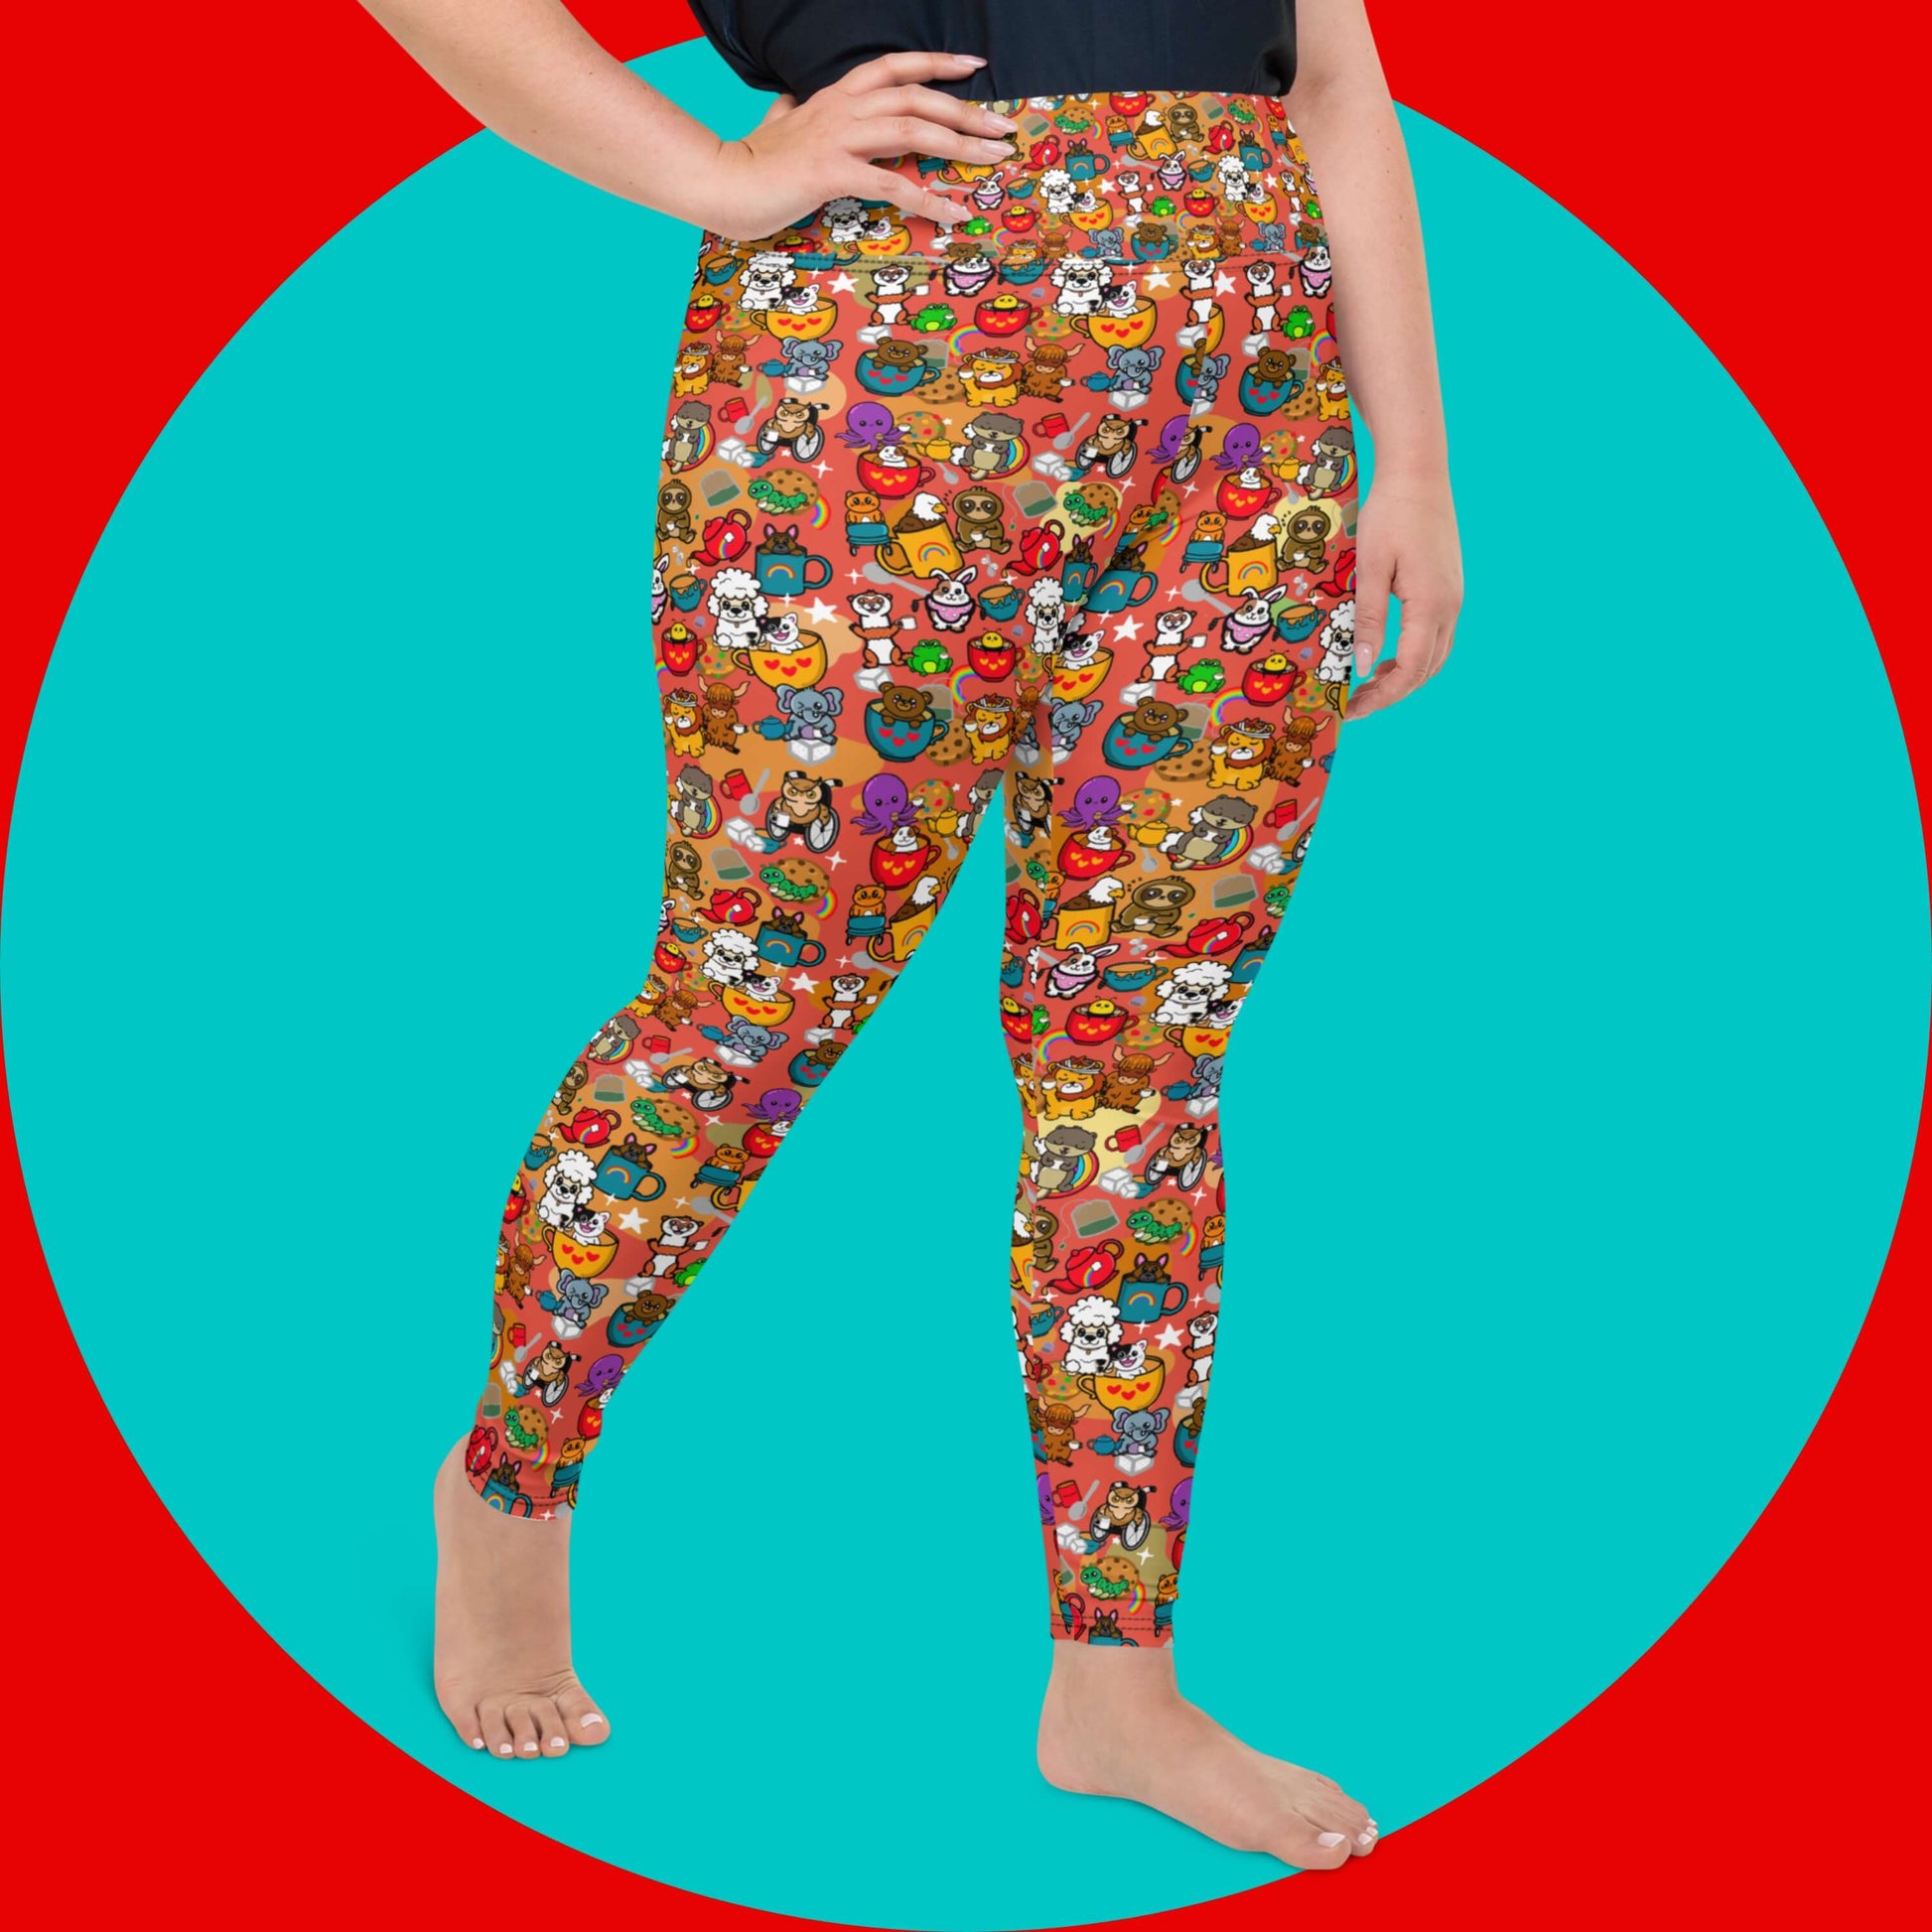 The Disabili Tea and Biscuits - Disability Plus Size Leggings being modelled by a femme person wearing a black tee on a red and blue background. The leggings feature various disabled and chronically ill animal characters drinking tea, sitting in tea mugs and holding up mugs. There is also various cookie biscuits, tea bags, sugar cubes, teapots, rainbows, sparkles and tea spills all underneath. The leggings are a punny gift raising awareness for disabilities.